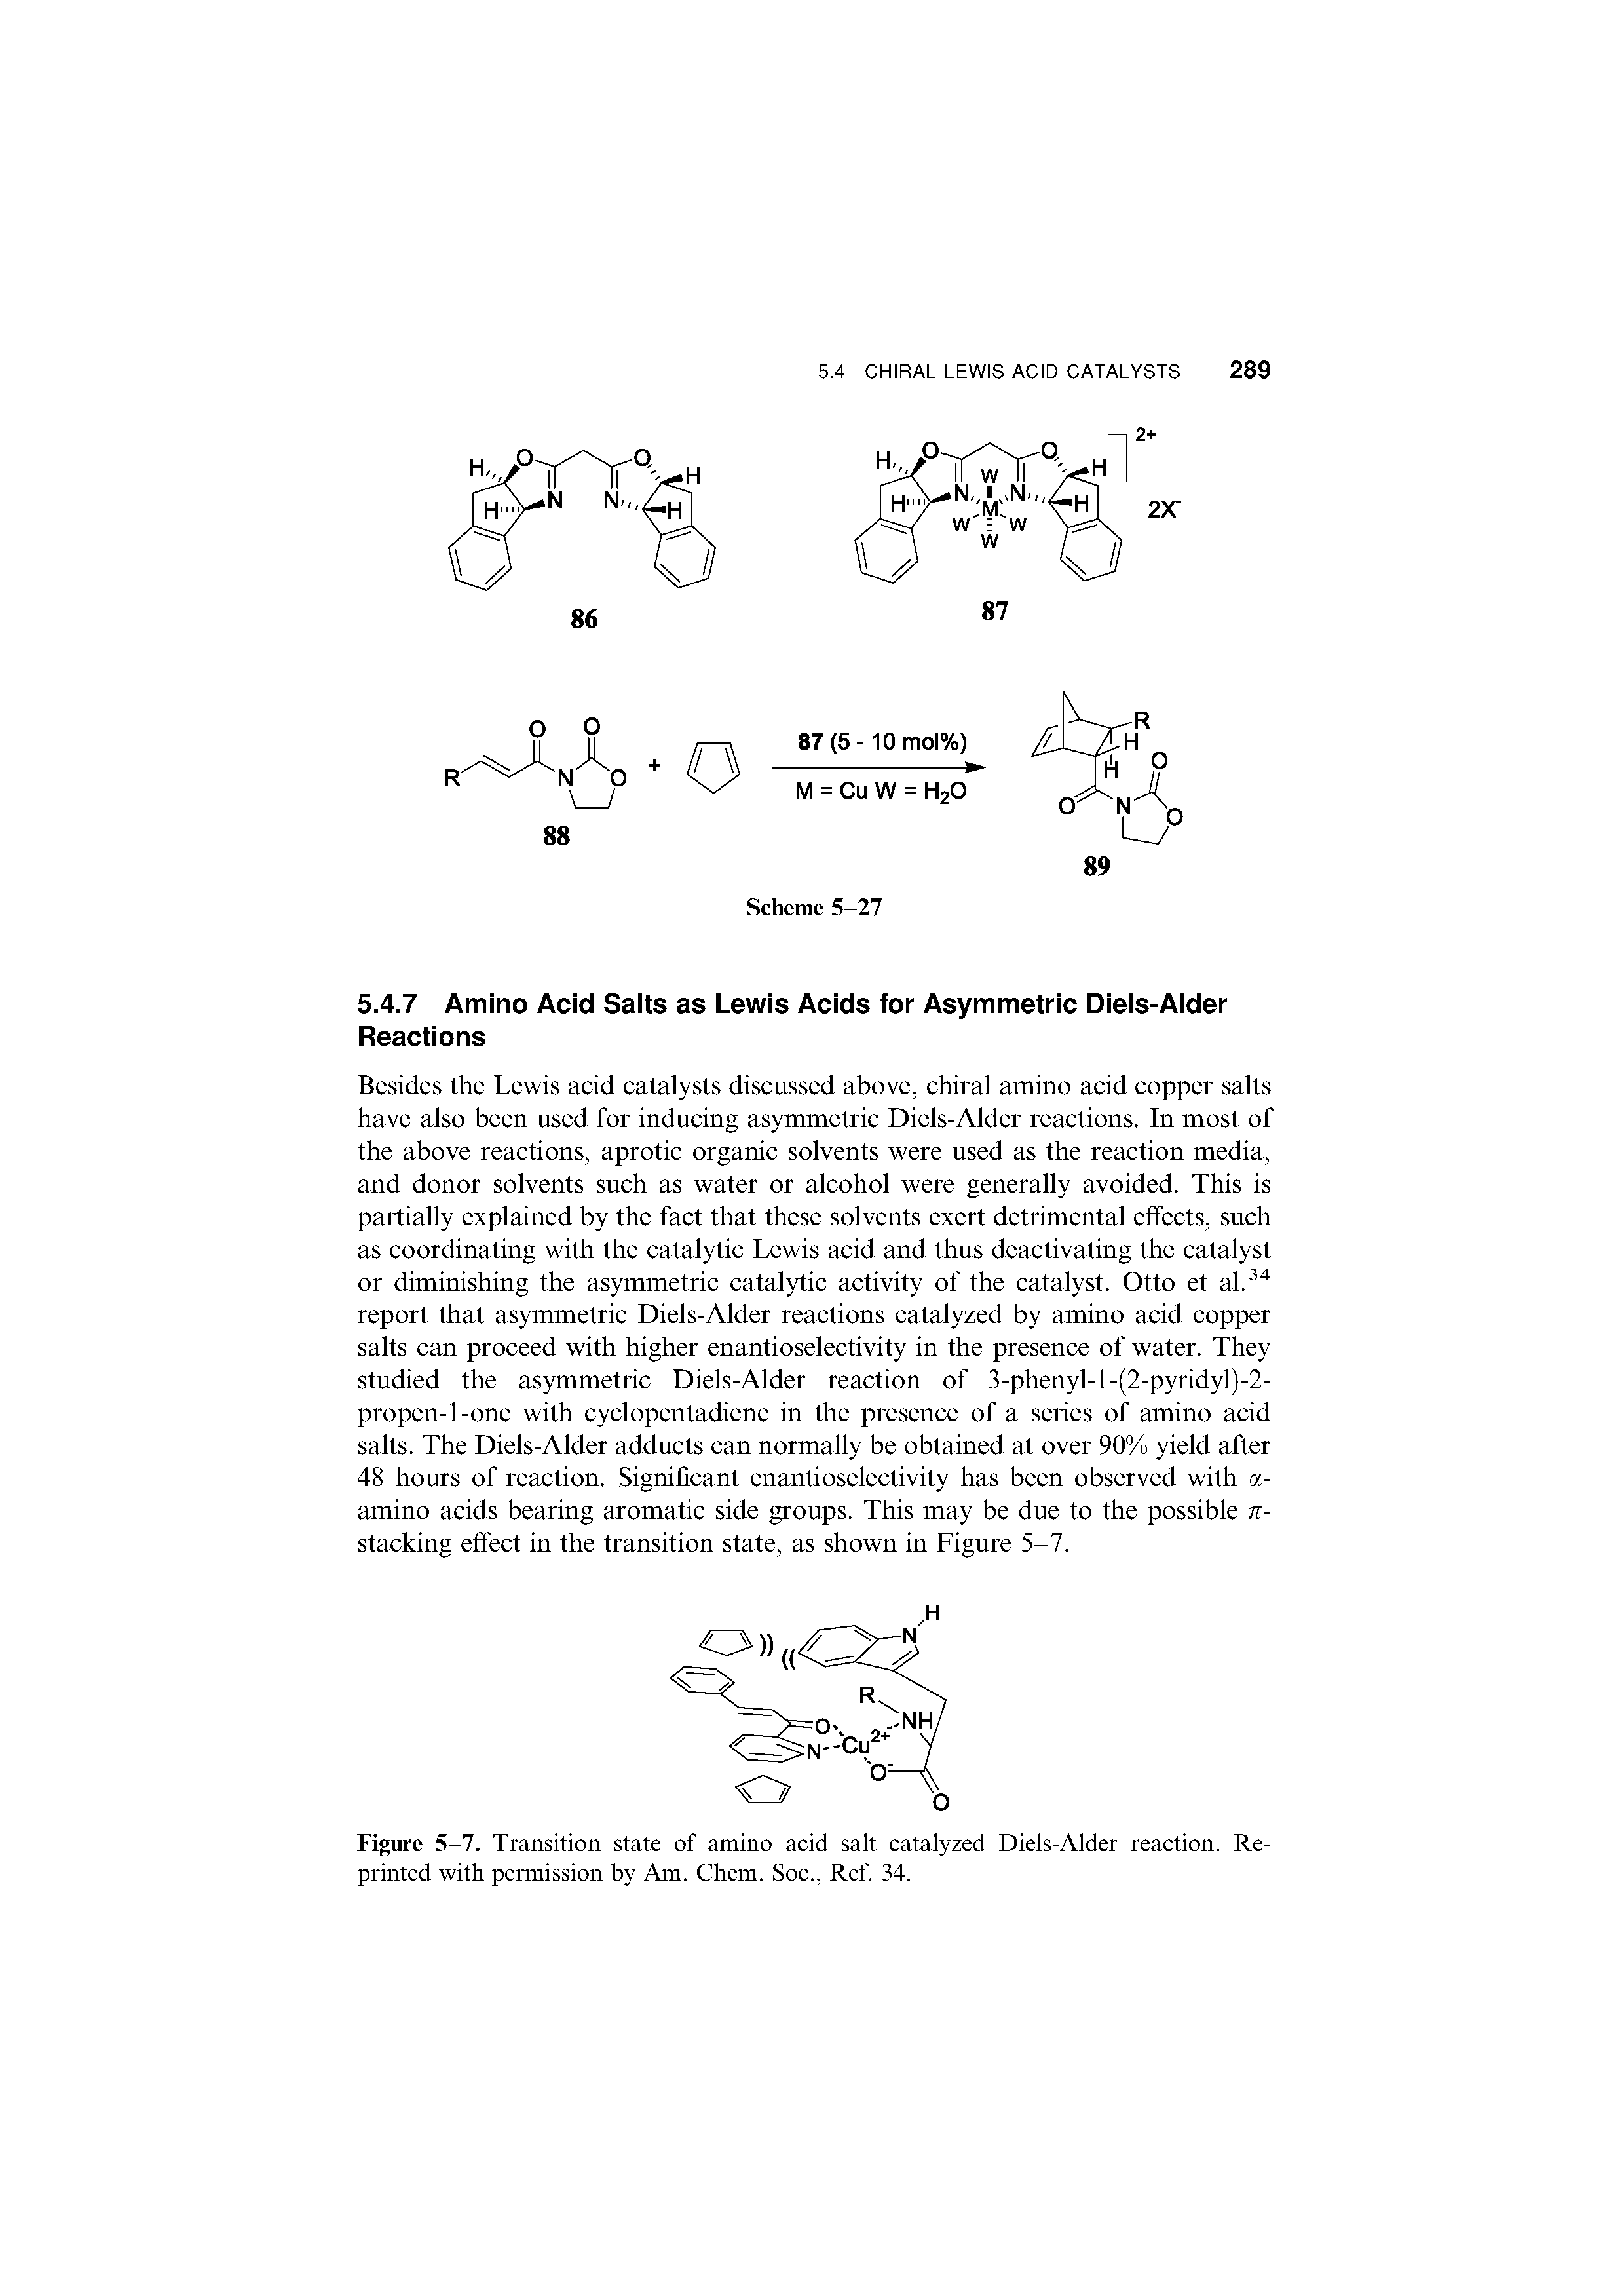 Figure 5-7. Transition state of amino acid salt catalyzed Diels-Alder reaction. Reprinted with permission by Am. Chem. Soc., Ref. 34.